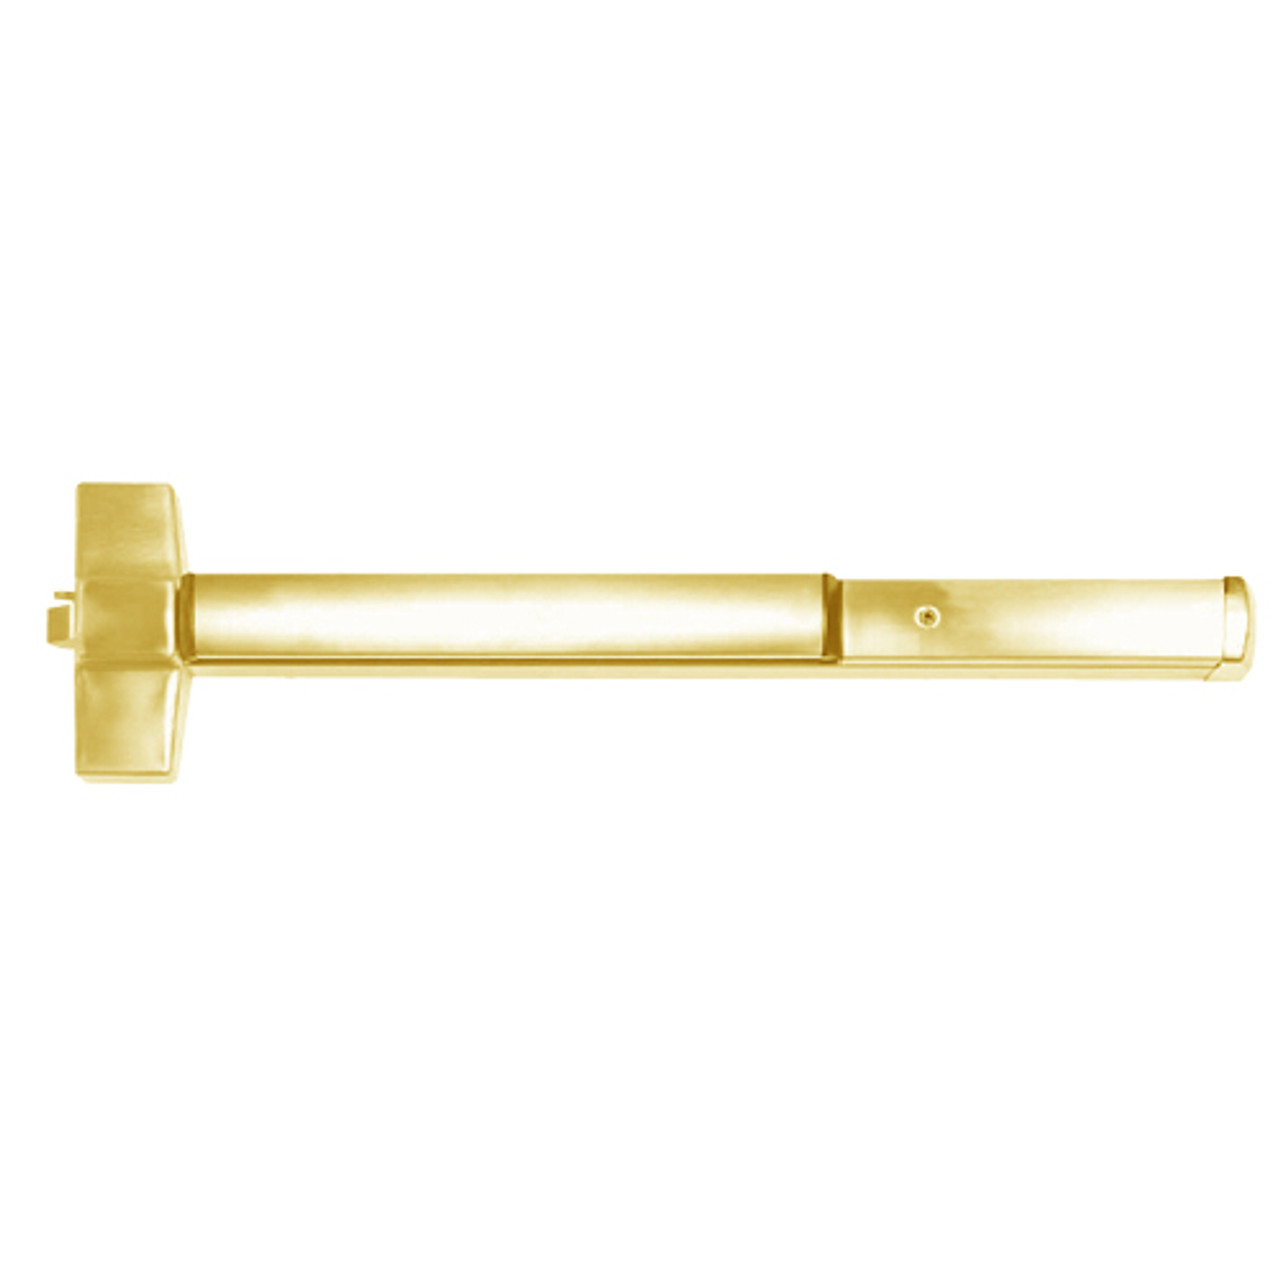 ED5200-605-W048-M92 Corbin ED5200 Series Non Fire Rated Exit Device with Touchbar Monitoring in Bright Brass Finish